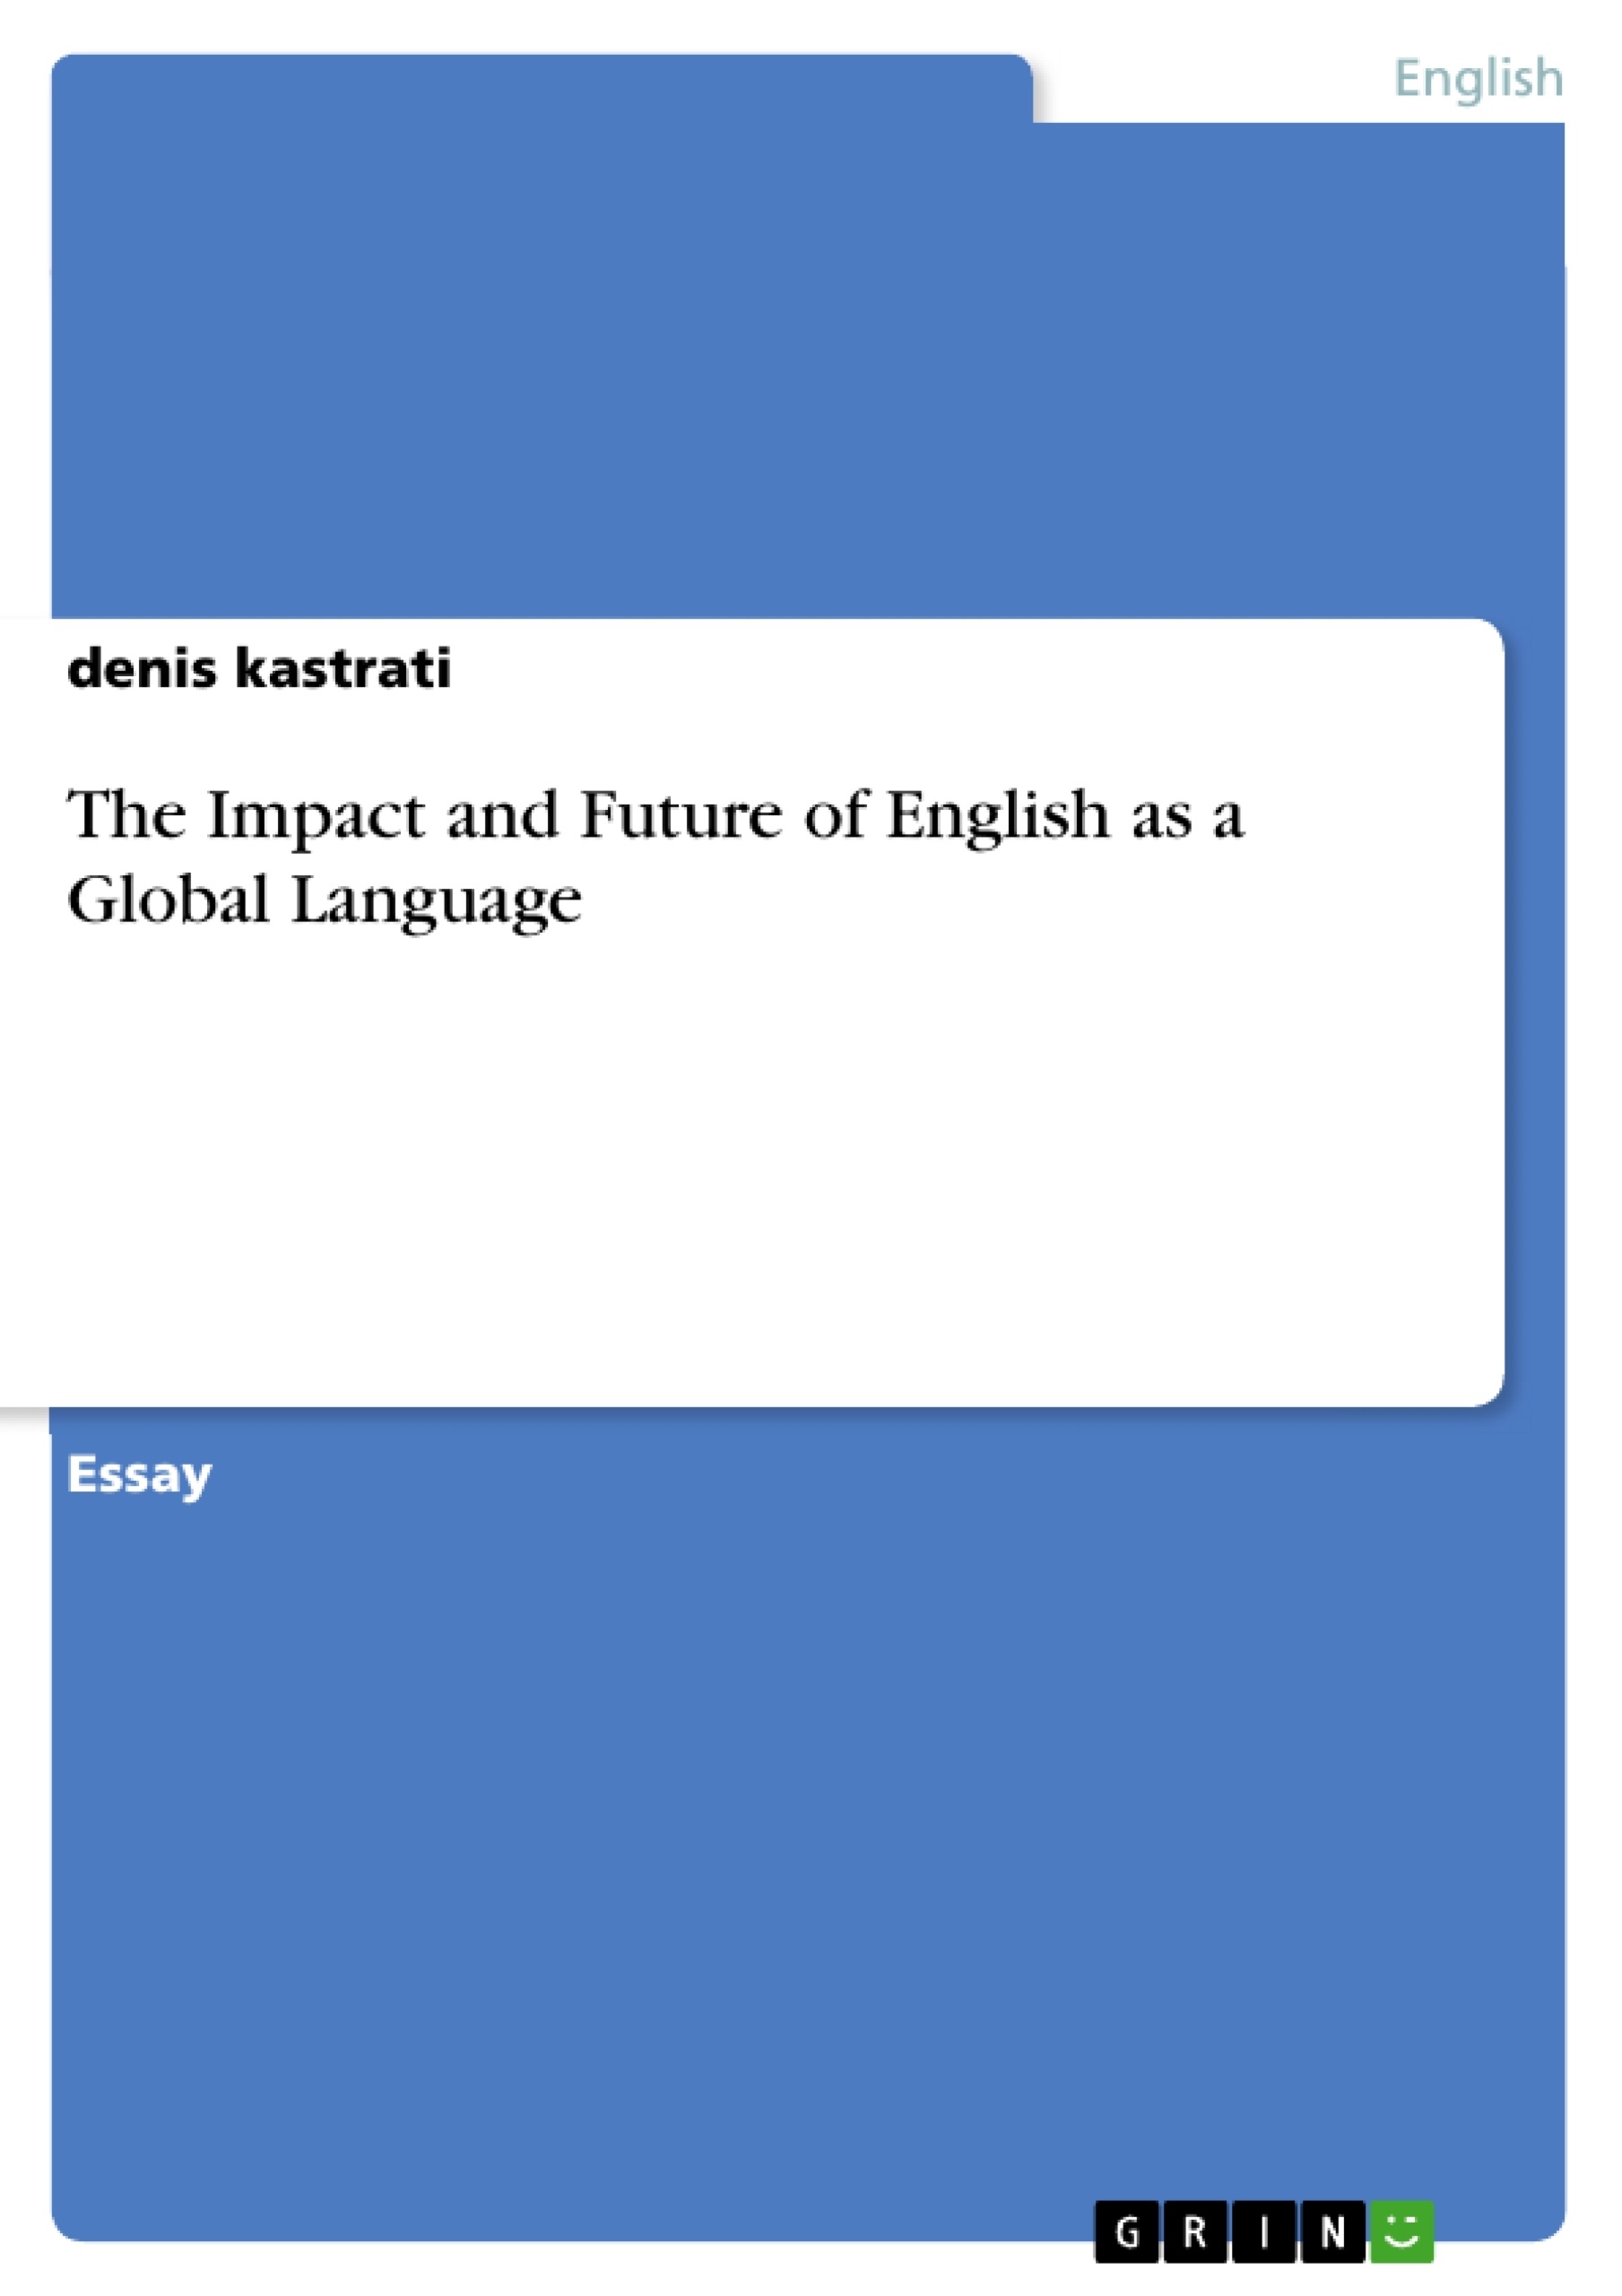 Title: The Impact and Future of English as a Global Language